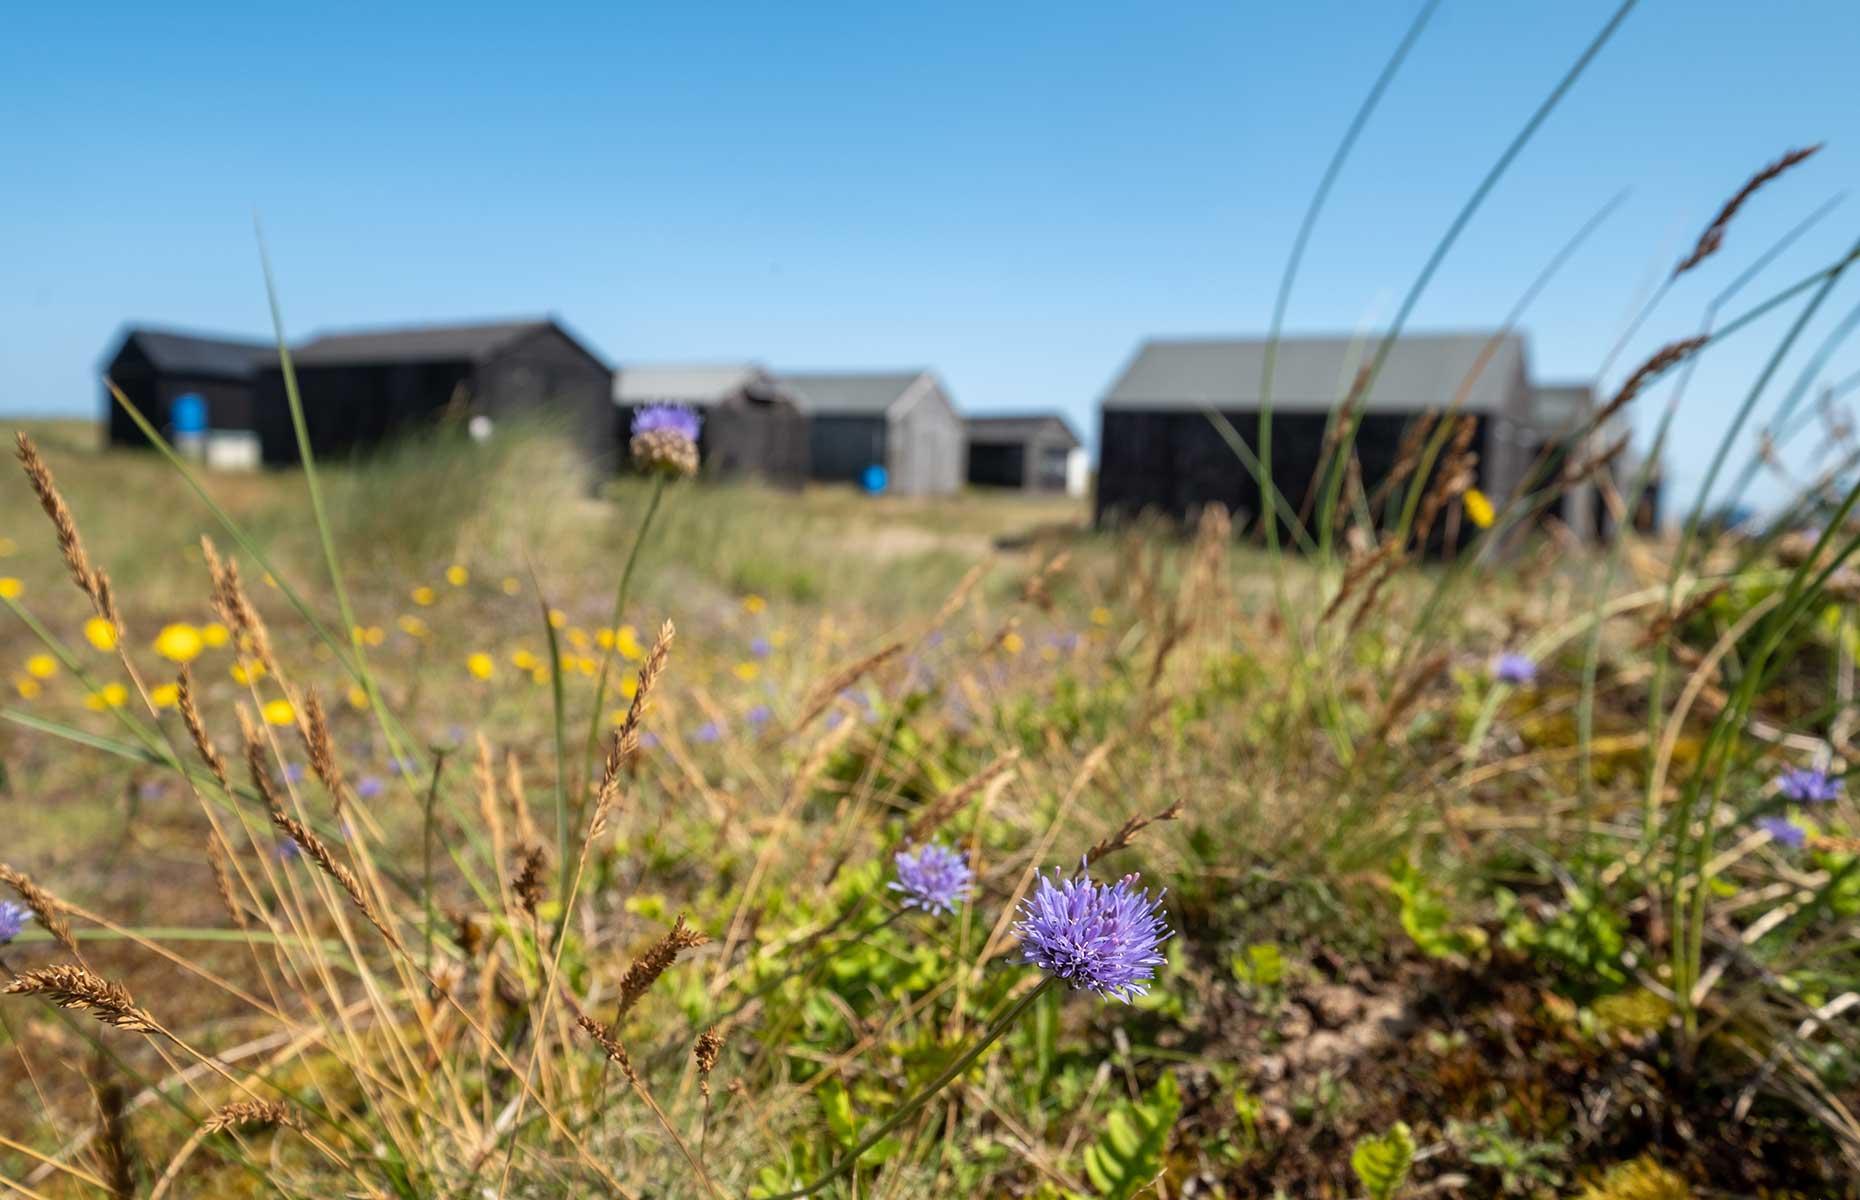 Winterton-on-Sea and its black painted wooden fishermens' huts (Image: Lois GoBe/Shutterstock)